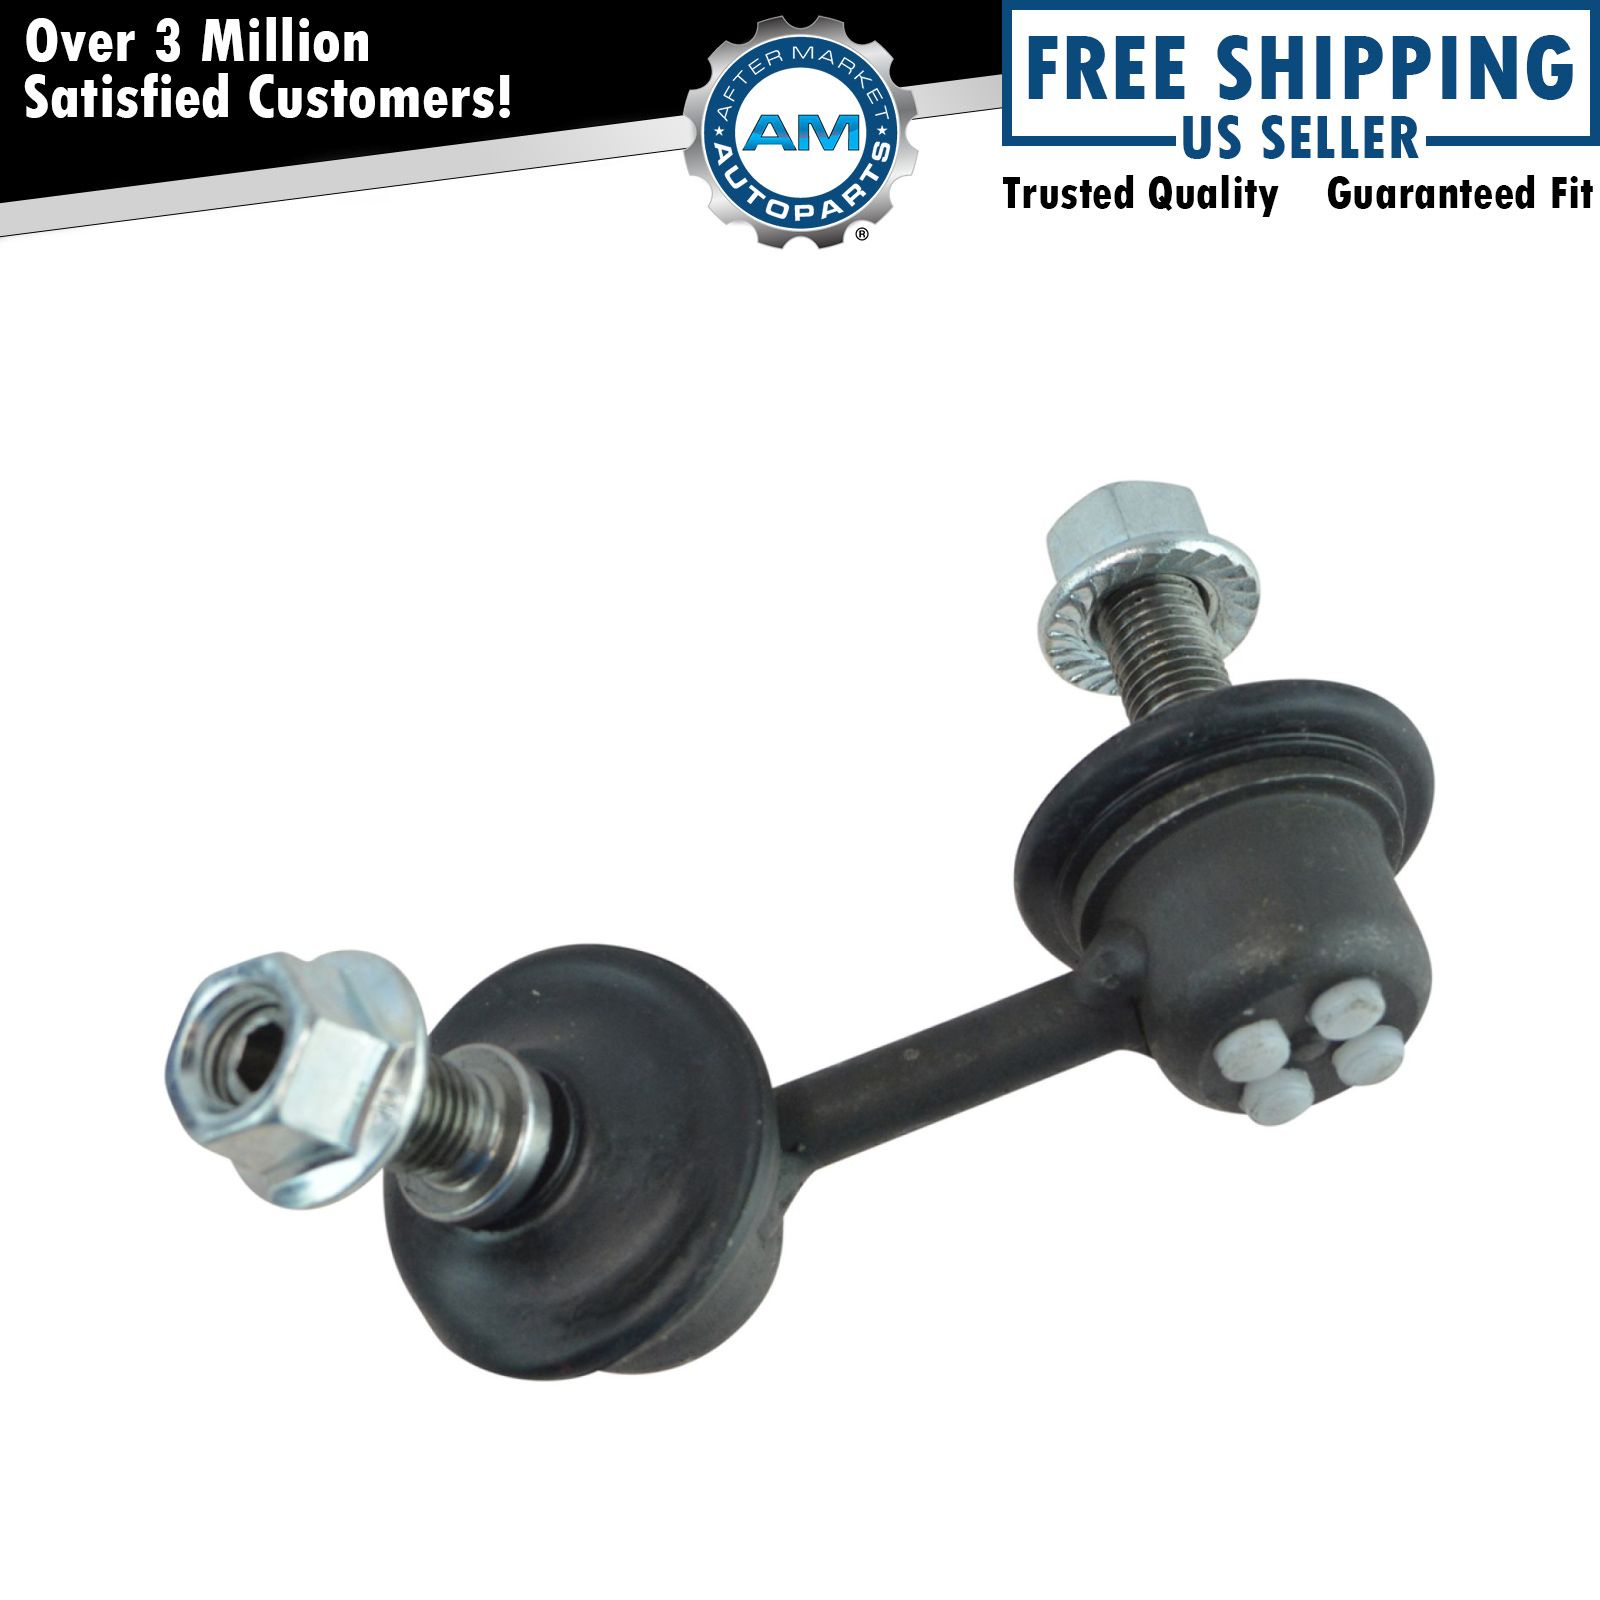 4PC Front Stabilizer Sway Bar Link Pair for 2000-2005 Hyundai Accent 